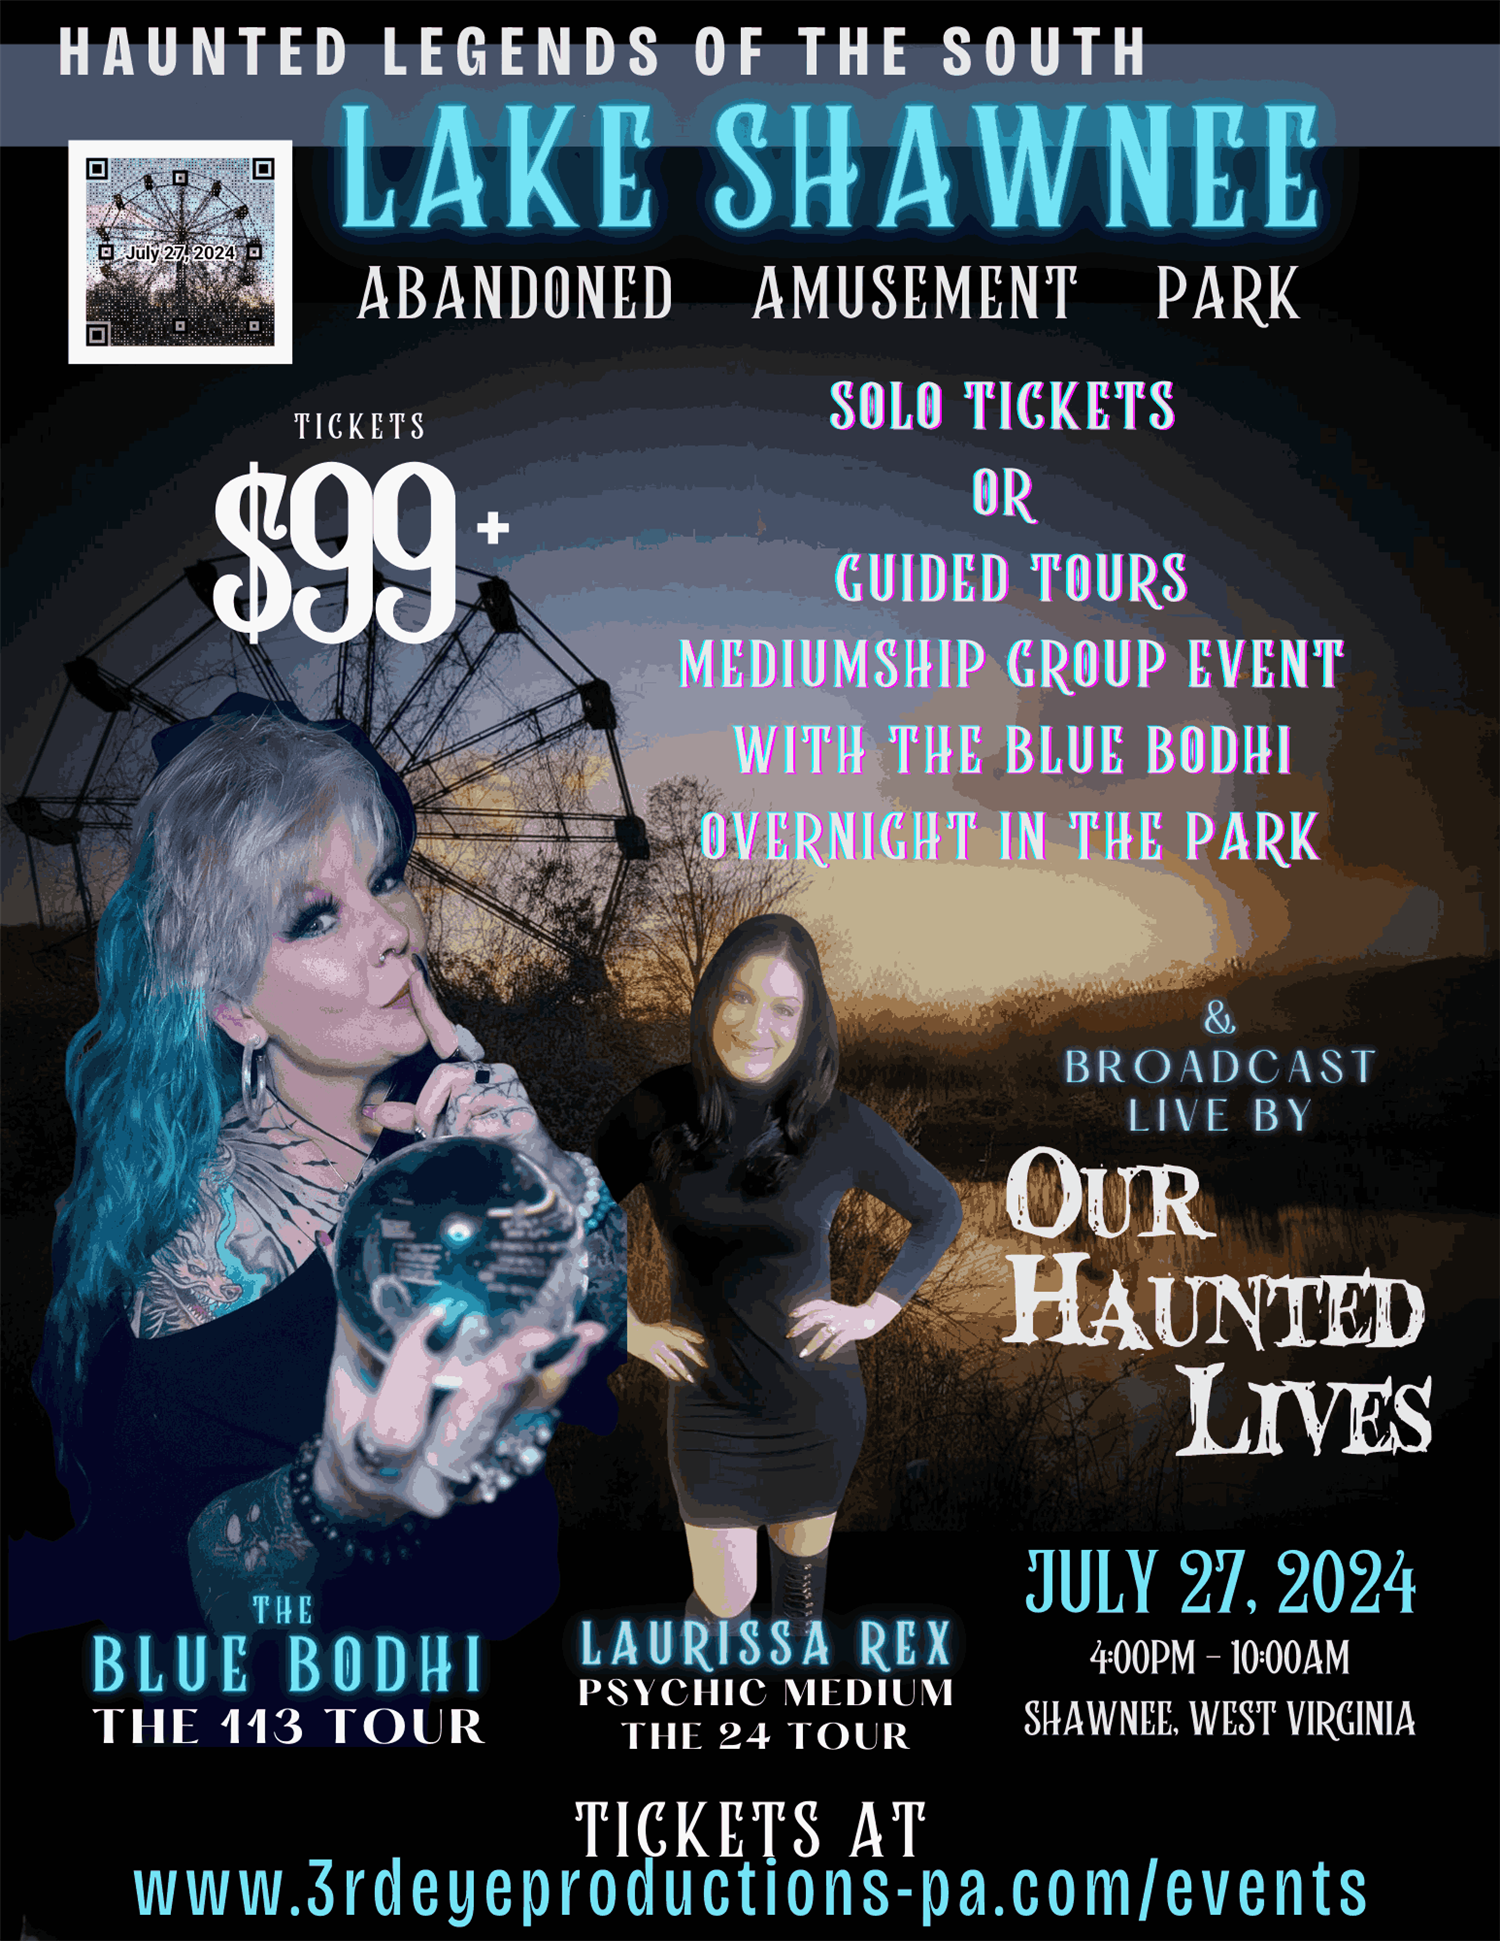 Haunted Legends of the South & Abandoned Lake Shawnee Amusement Park  on Jul 27, 16:00@Lake Shawnee - Buy tickets and Get information on Third Eye Event Productions, L 